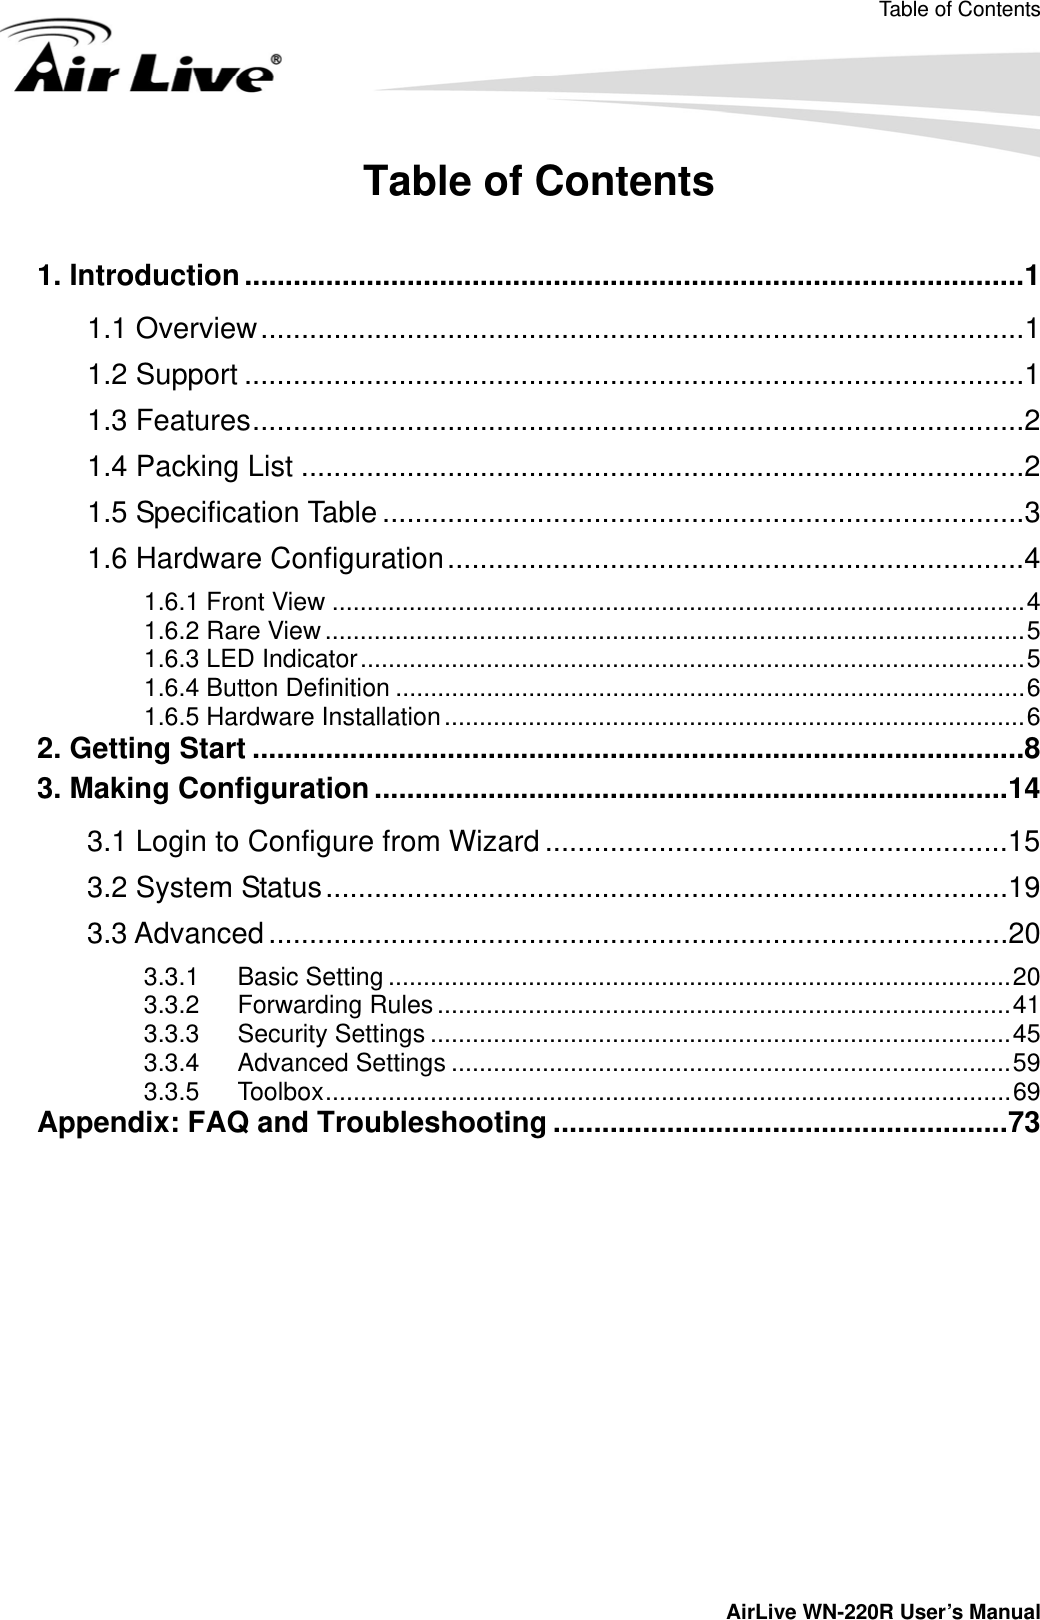 Table of Contents         AirLive WN-220R User’s Manual Table of Contents  1. Introduction ................................................................................................1 1.1 Overview..............................................................................................1 1.2 Support ................................................................................................1 1.3 Features...............................................................................................2 1.4 Packing List .........................................................................................2 1.5 Specification Table ...............................................................................3 1.6 Hardware Configuration.......................................................................4 1.6.1 Front View ...................................................................................................4 1.6.2 Rare View ....................................................................................................5 1.6.3 LED Indicator...............................................................................................5 1.6.4 Button Definition ..........................................................................................6 1.6.5 Hardware Installation...................................................................................6 2. Getting Start ...............................................................................................8 3. Making Configuration ..............................................................................14 3.1 Login to Configure from Wizard .........................................................15 3.2 System Status....................................................................................19 3.3 Advanced ...........................................................................................20 3.3.1 Basic Setting .........................................................................................20 3.3.2 Forwarding Rules ..................................................................................41 3.3.3 Security Settings ...................................................................................45 3.3.4 Advanced Settings ................................................................................59 3.3.5 Toolbox..................................................................................................69 Appendix: FAQ and Troubleshooting ........................................................73  